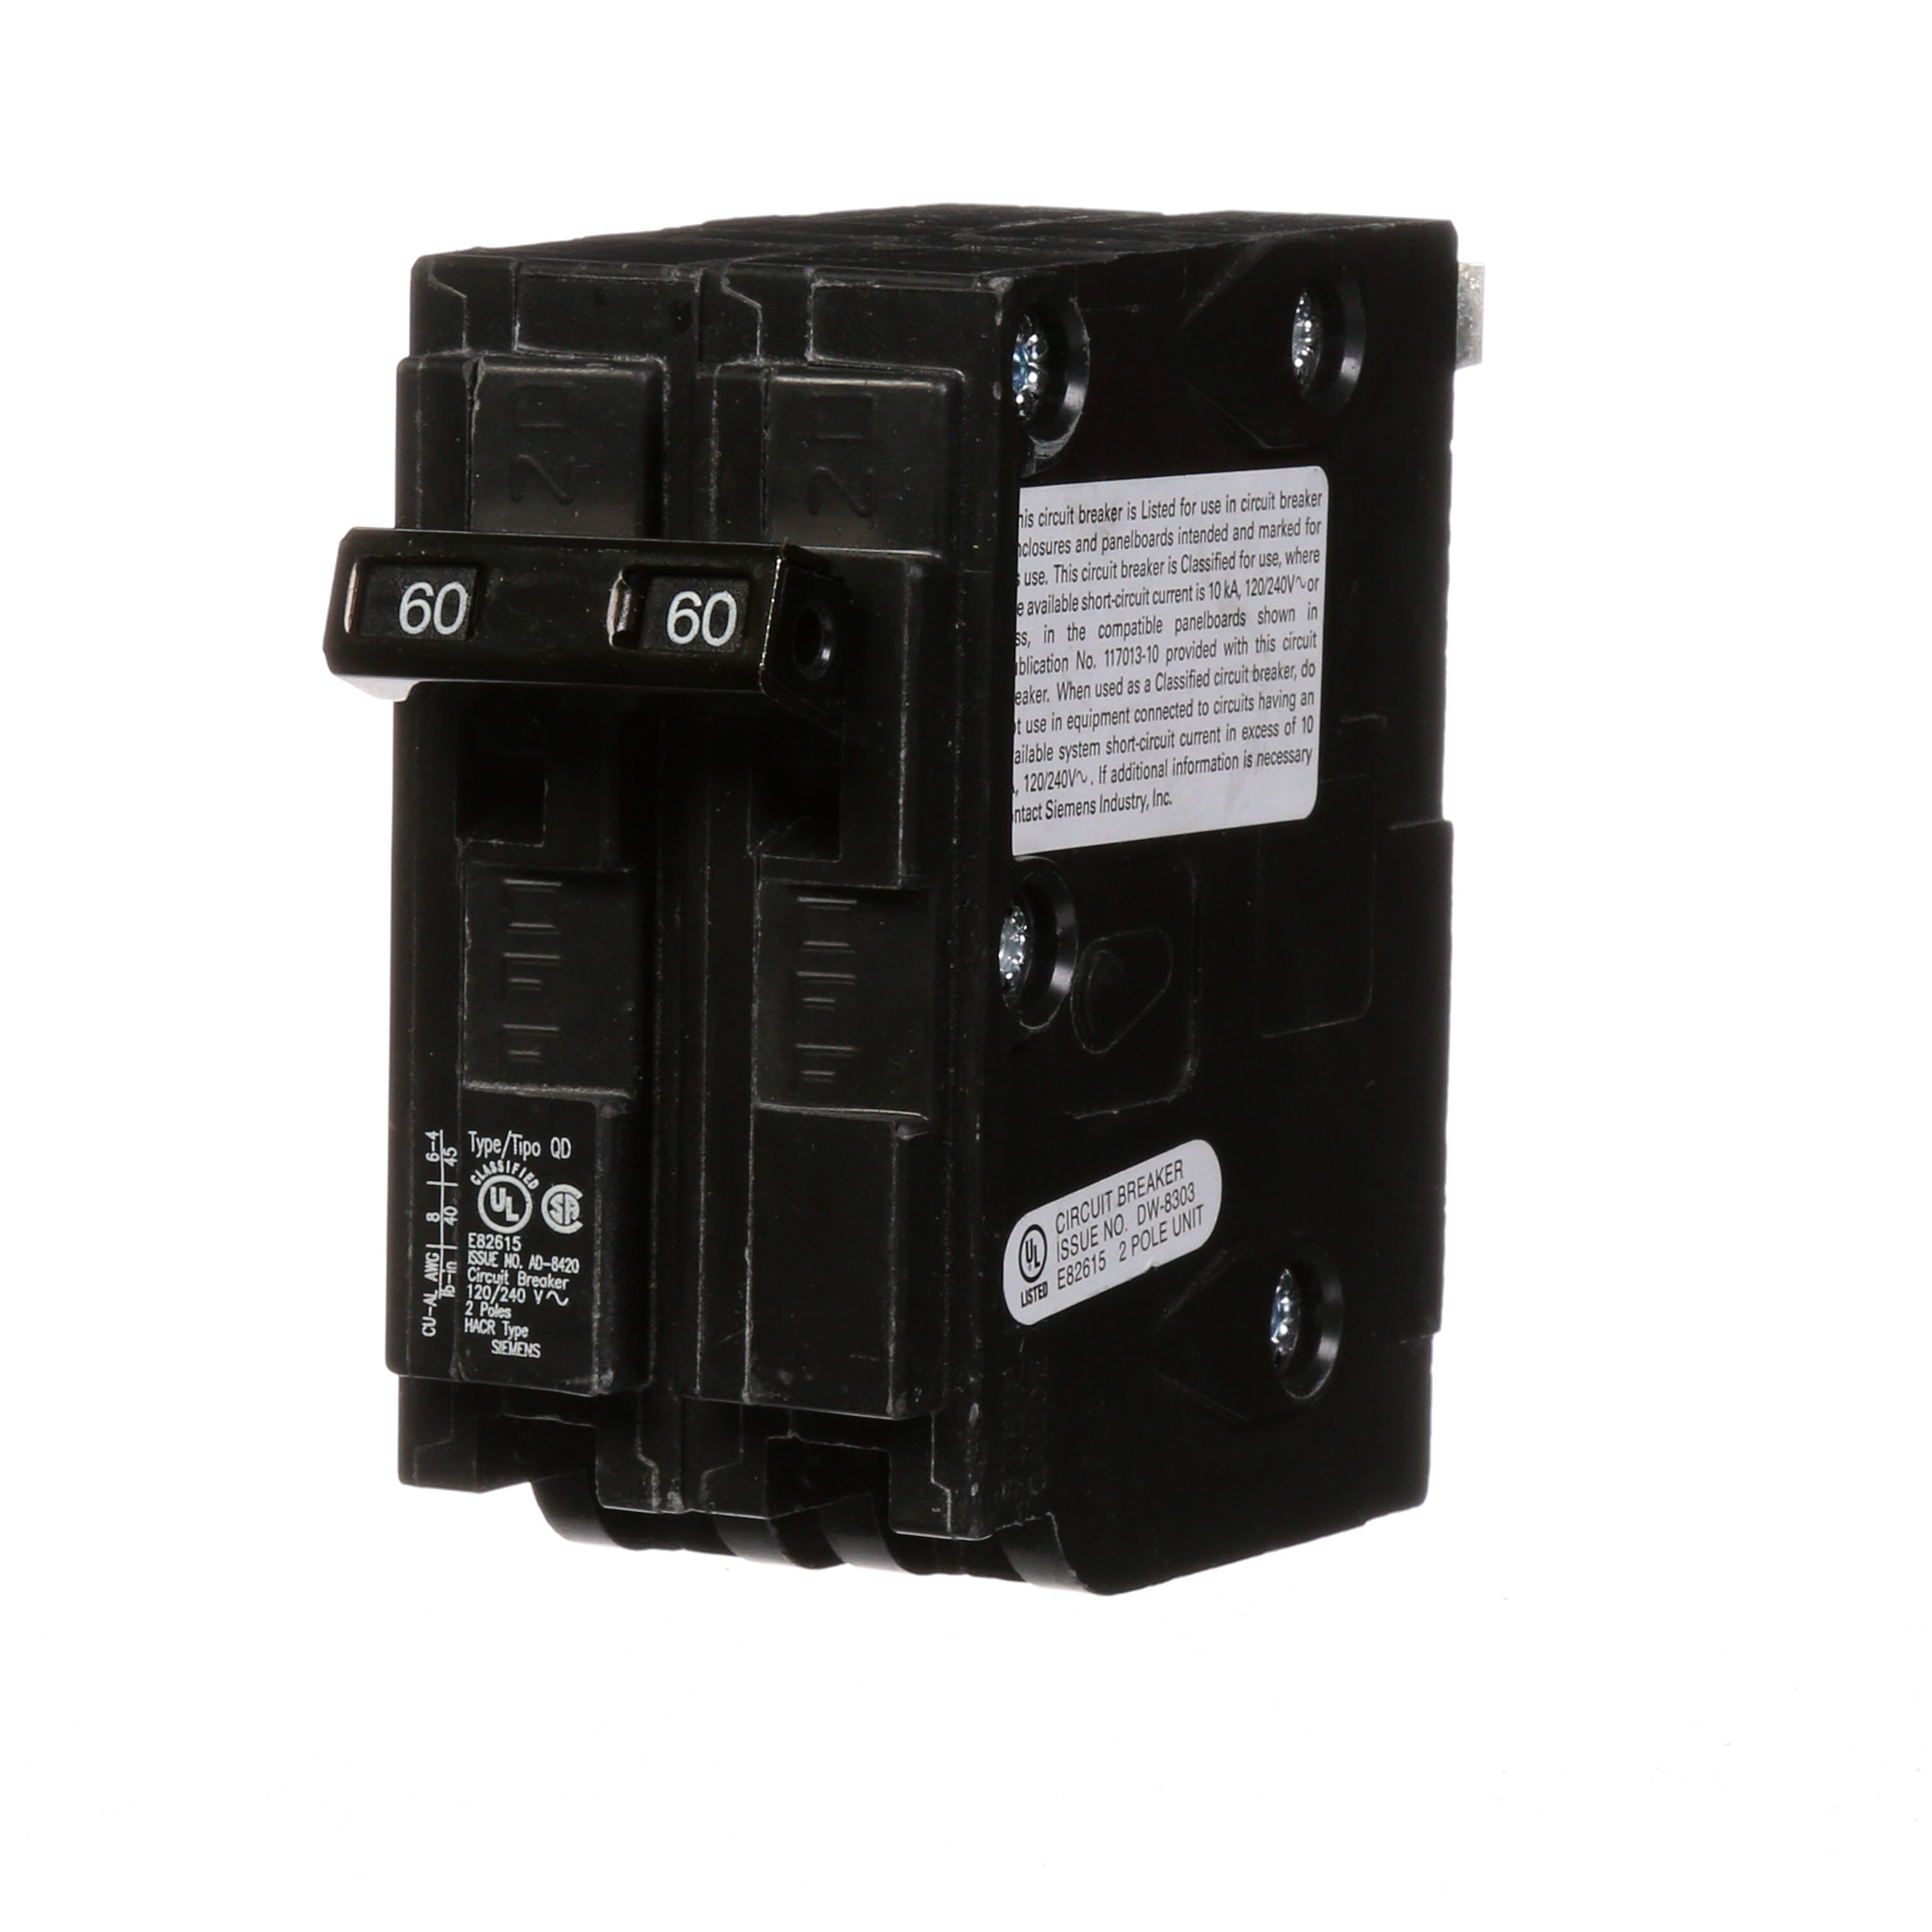 Siemens Low Voltage Residential Circuit Breakers. QD 3/4 IN Plug-In 2-Pole common trip circuit breaker. Rated 120/240V (60A) AIR (10 kA). Special features HACRrated, UL listed and classified.